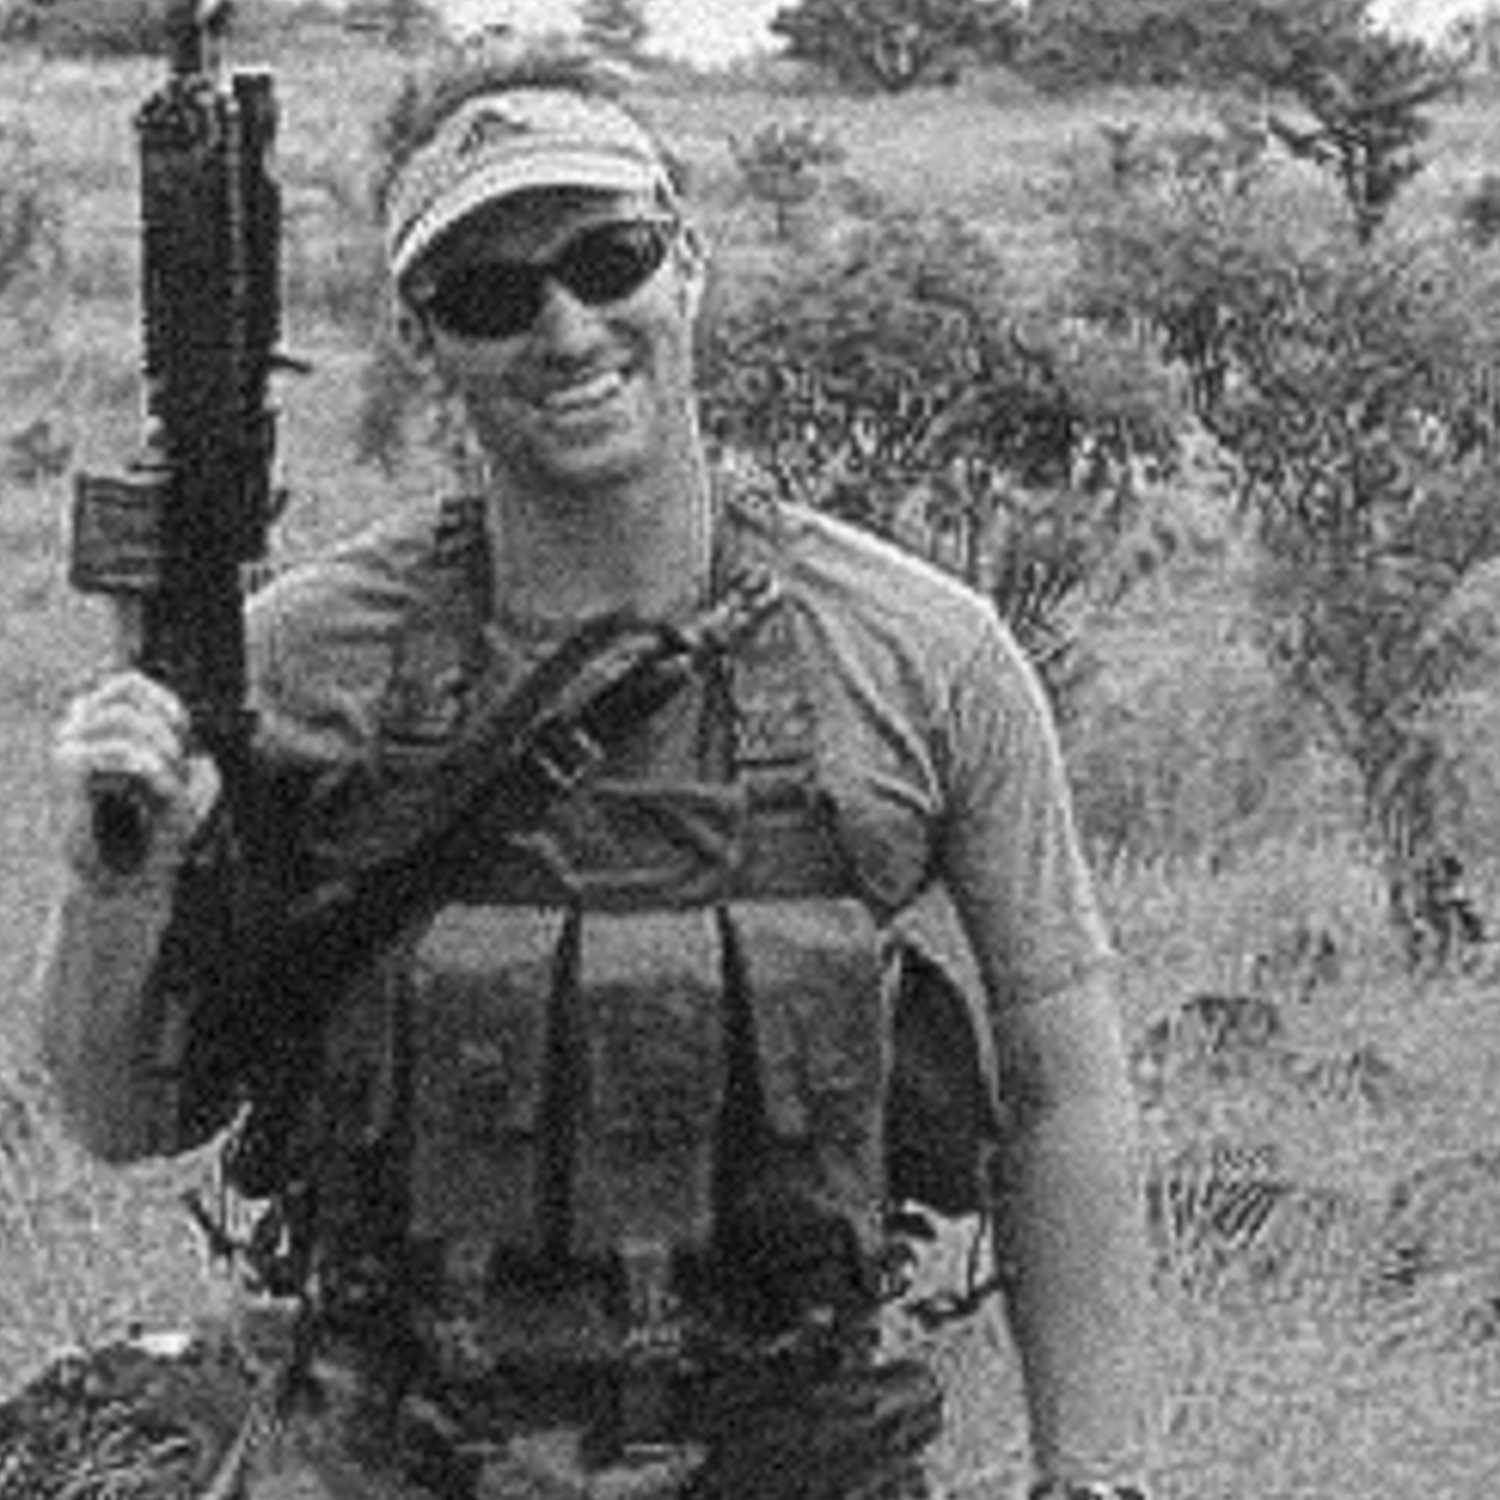 A photo of Glen A. Doherty in a military outfit and sunglasses, standing in greenery and holding a gun.